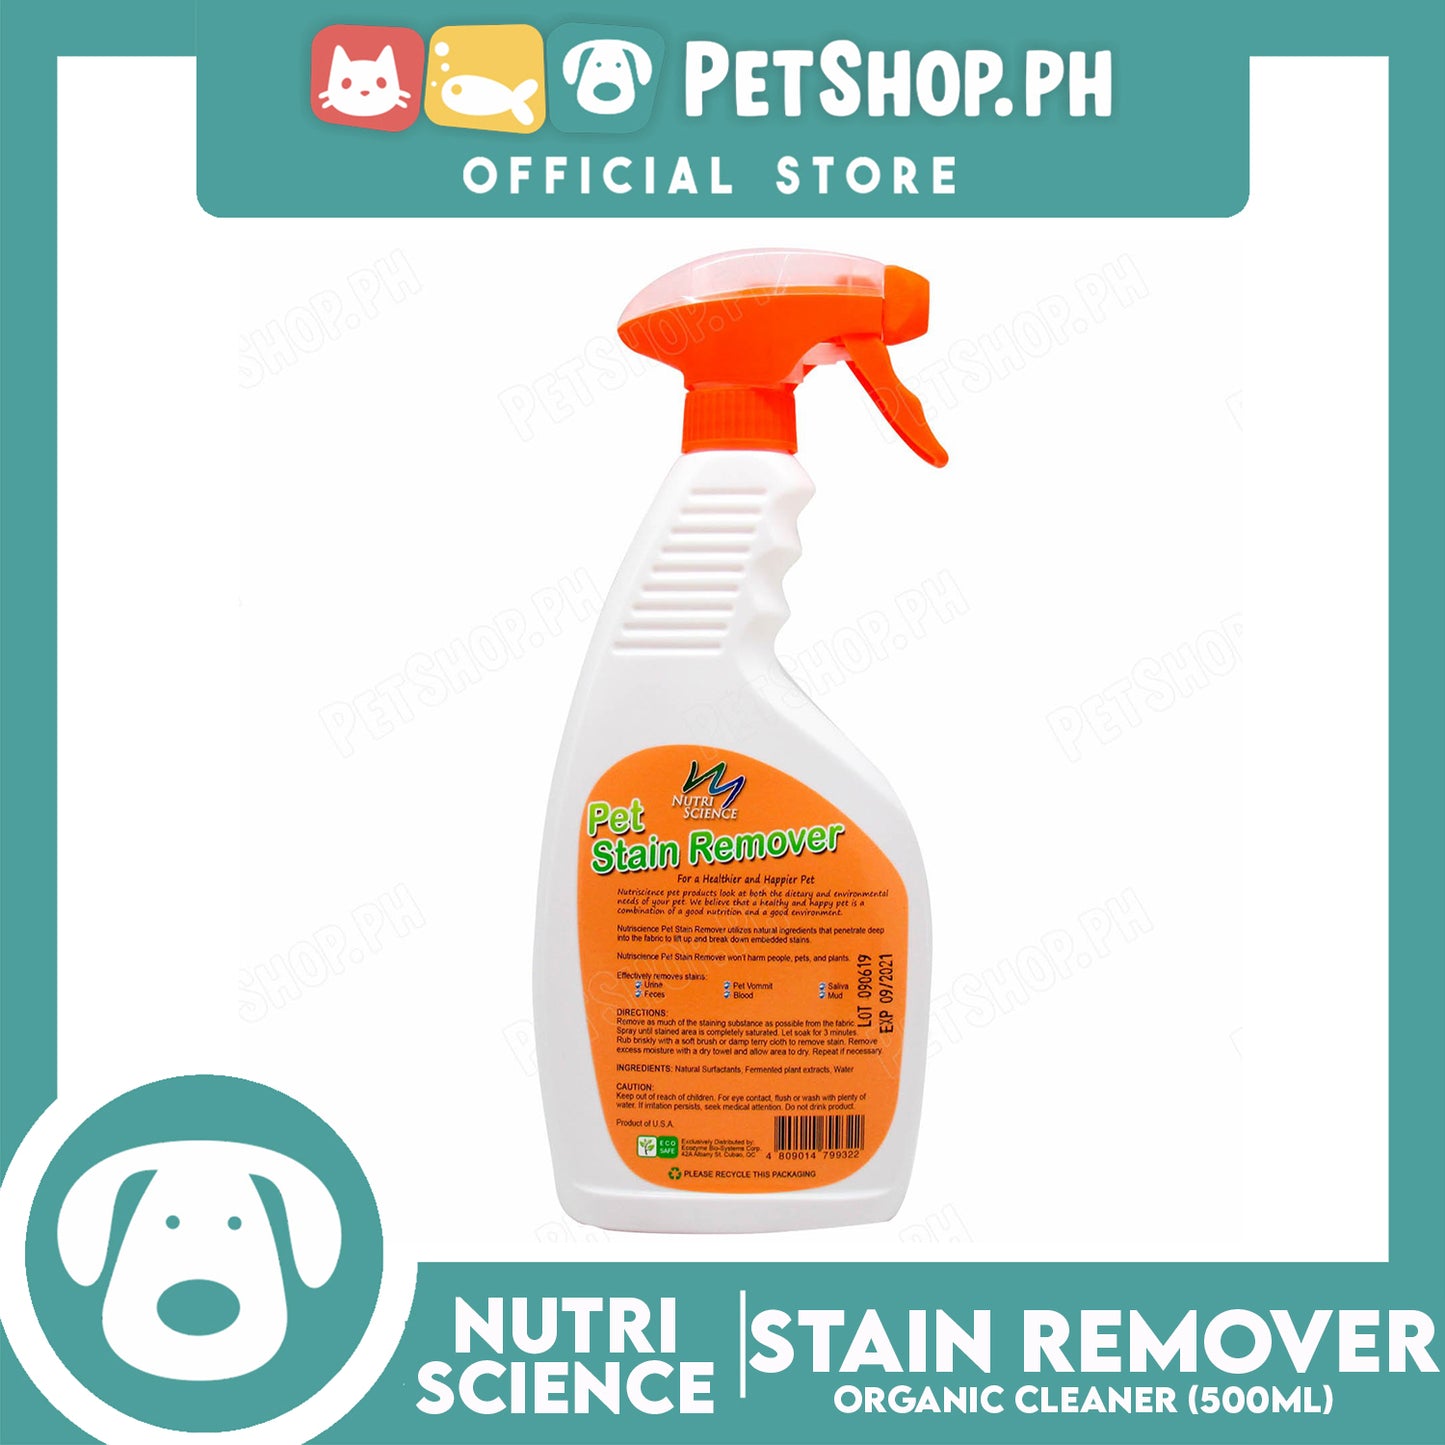 Nutri Science Pet Stain Remover Organic Cleaner 500ml